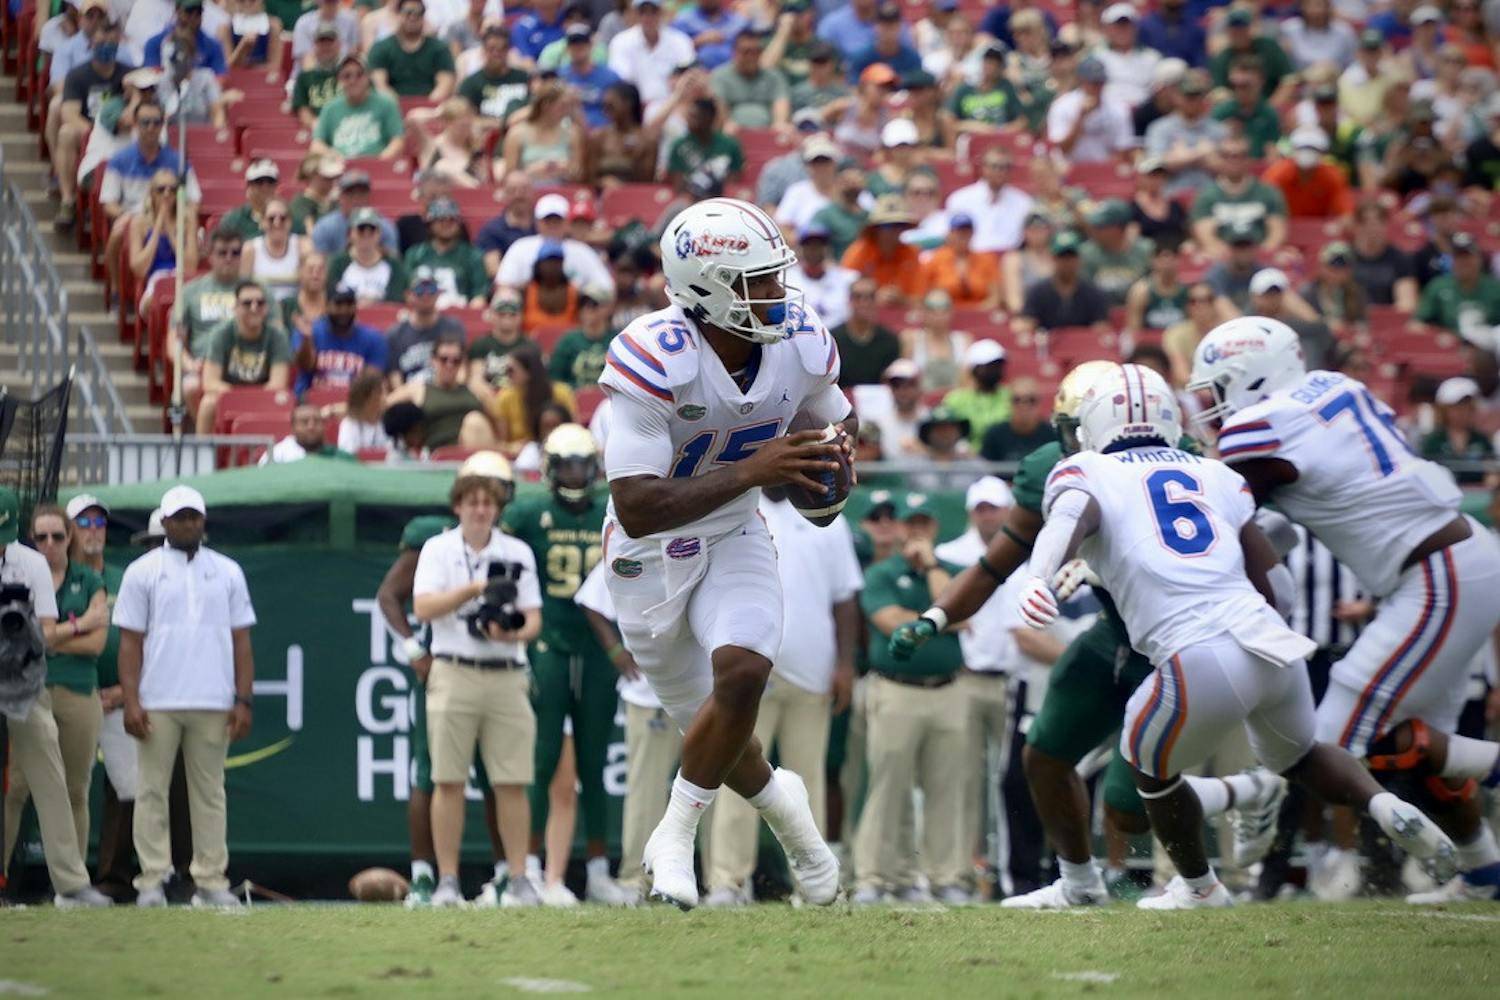 Quarterback Anthony Richardson scrambles to his right versus South Florida Sept. 11, 2021. Richardson will lead the Florida quarterback room this season, while the depth behind him is questionable.  